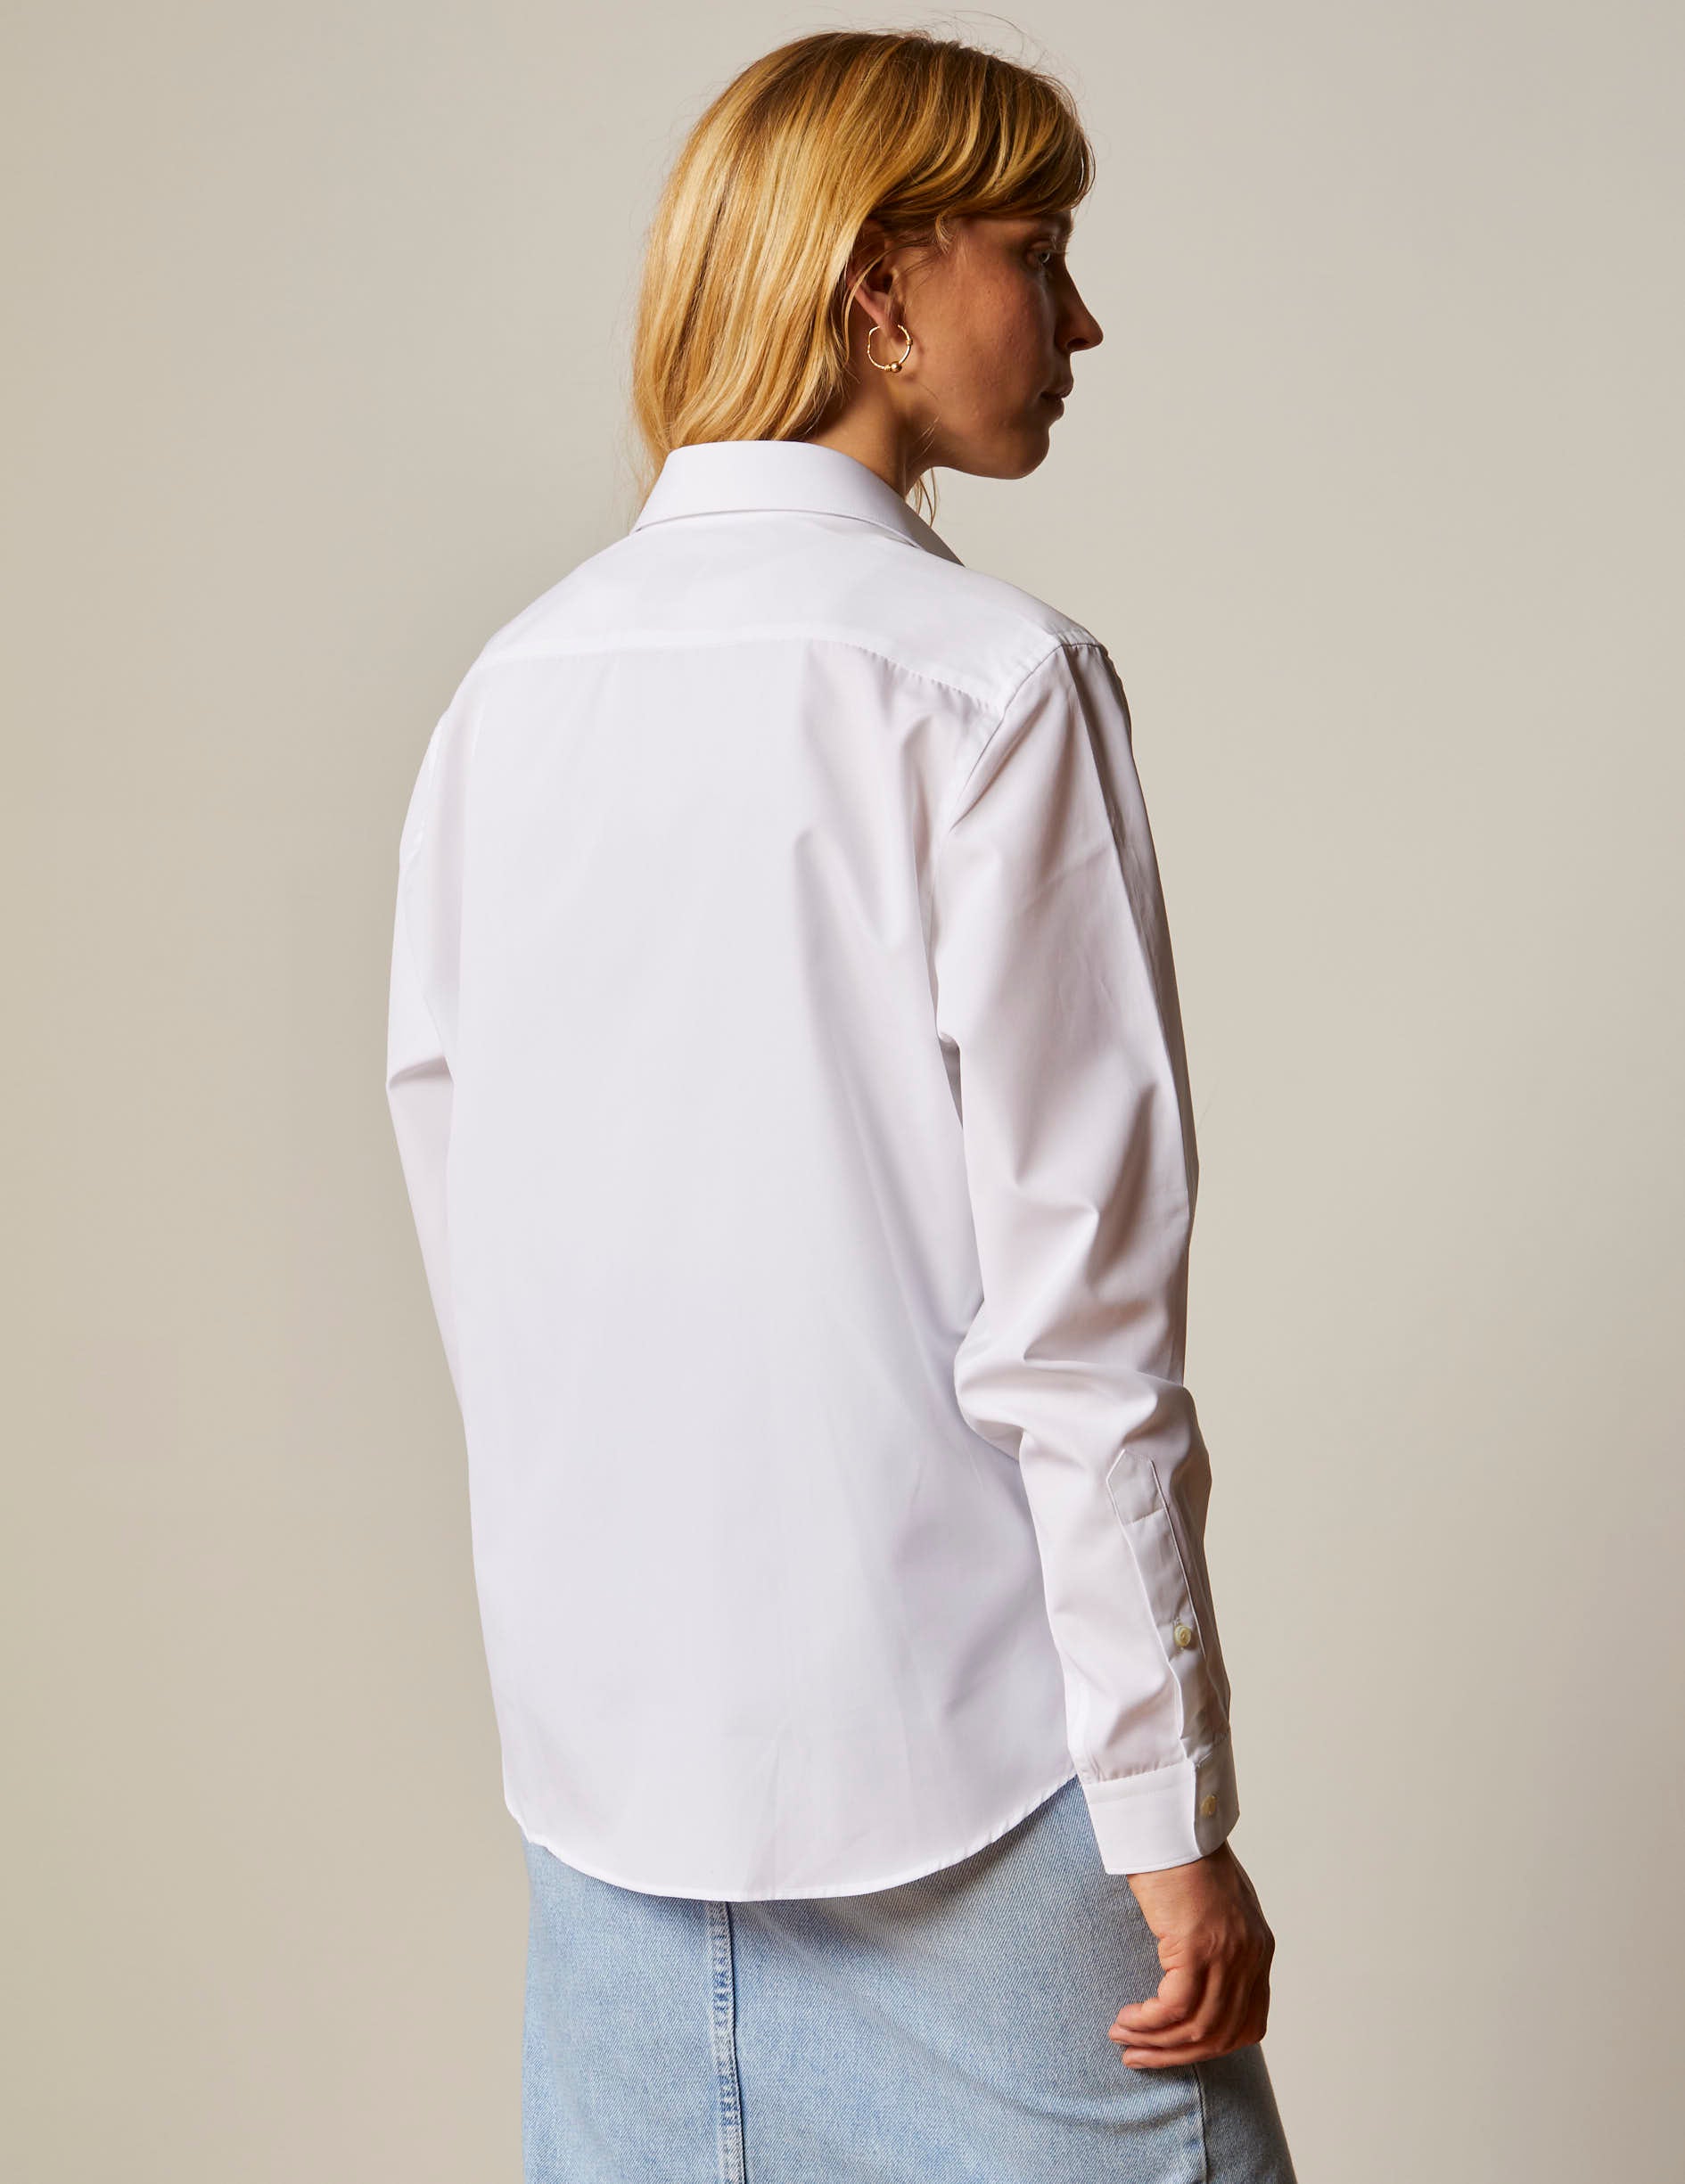 "JE T'AIME" WHITE SHIRT EMBROIDERED IN GOLD - Poplin - Figaret Collar